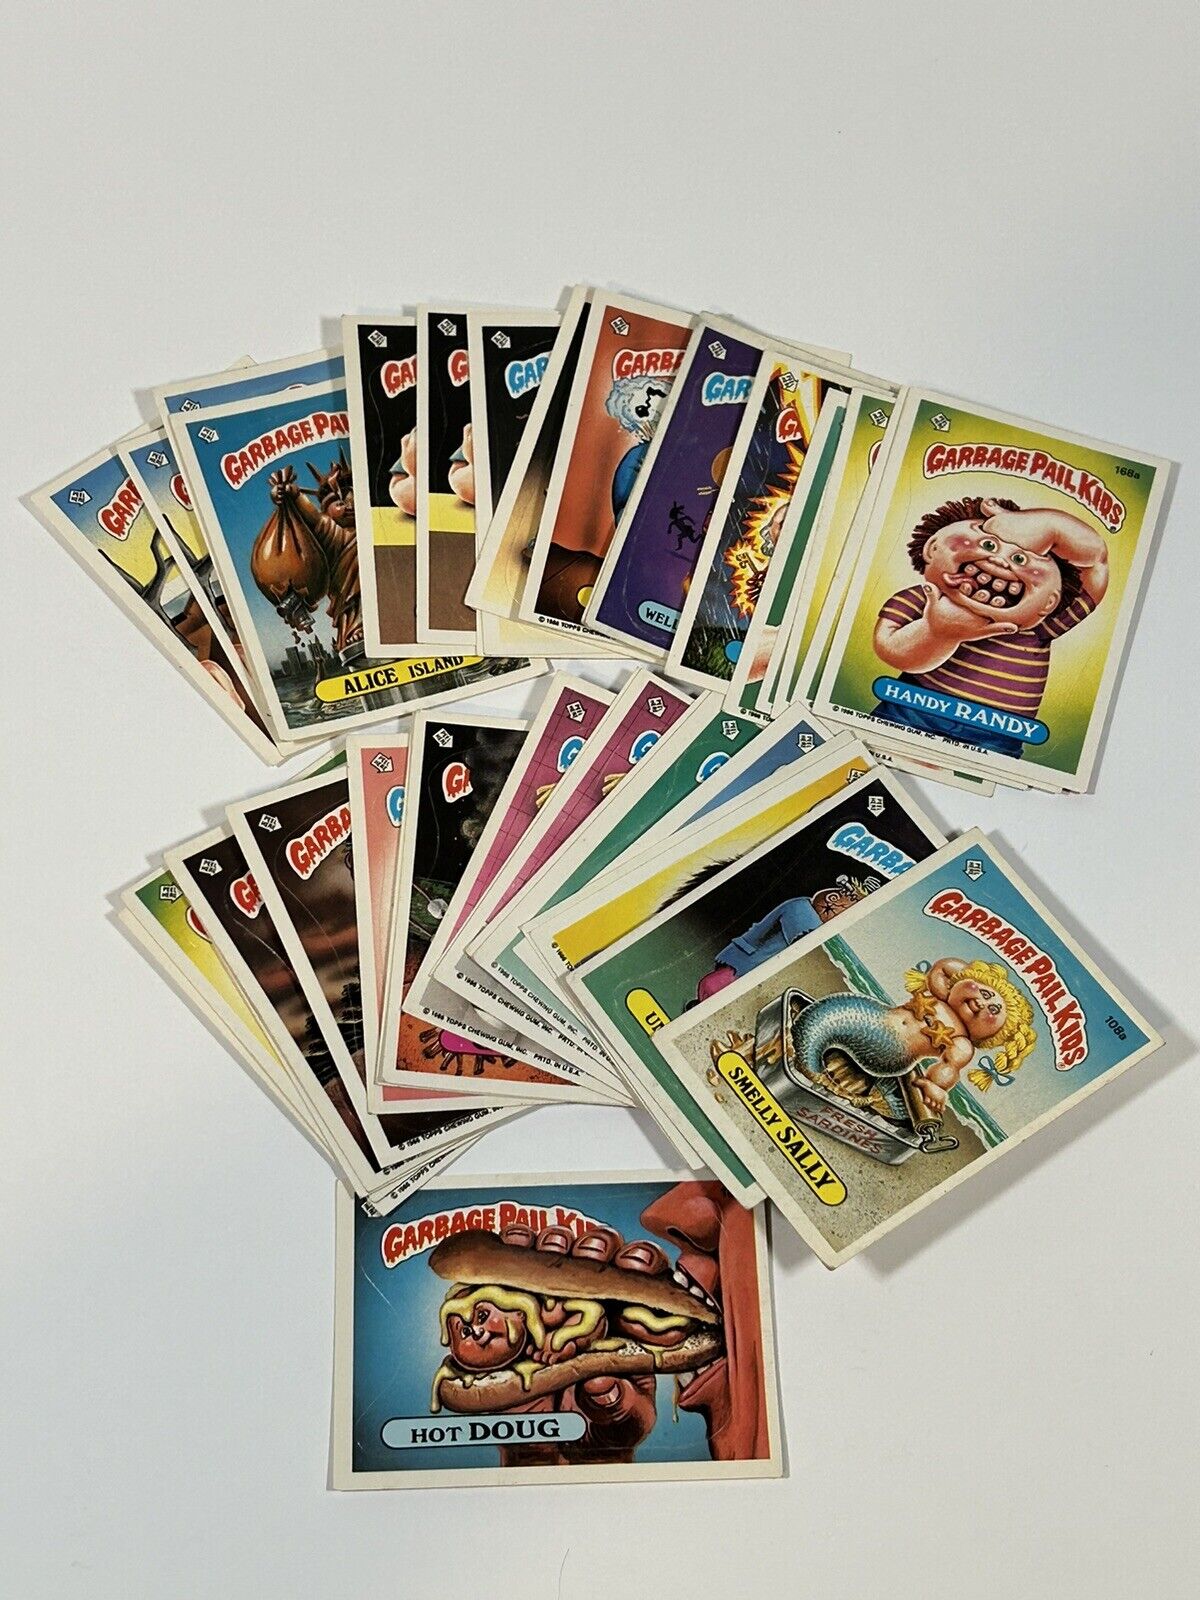 1986 TOPPS GARBAGE PAIL KIDS GPK ORIGINAL STICKER CARDS SOME DOUBLES